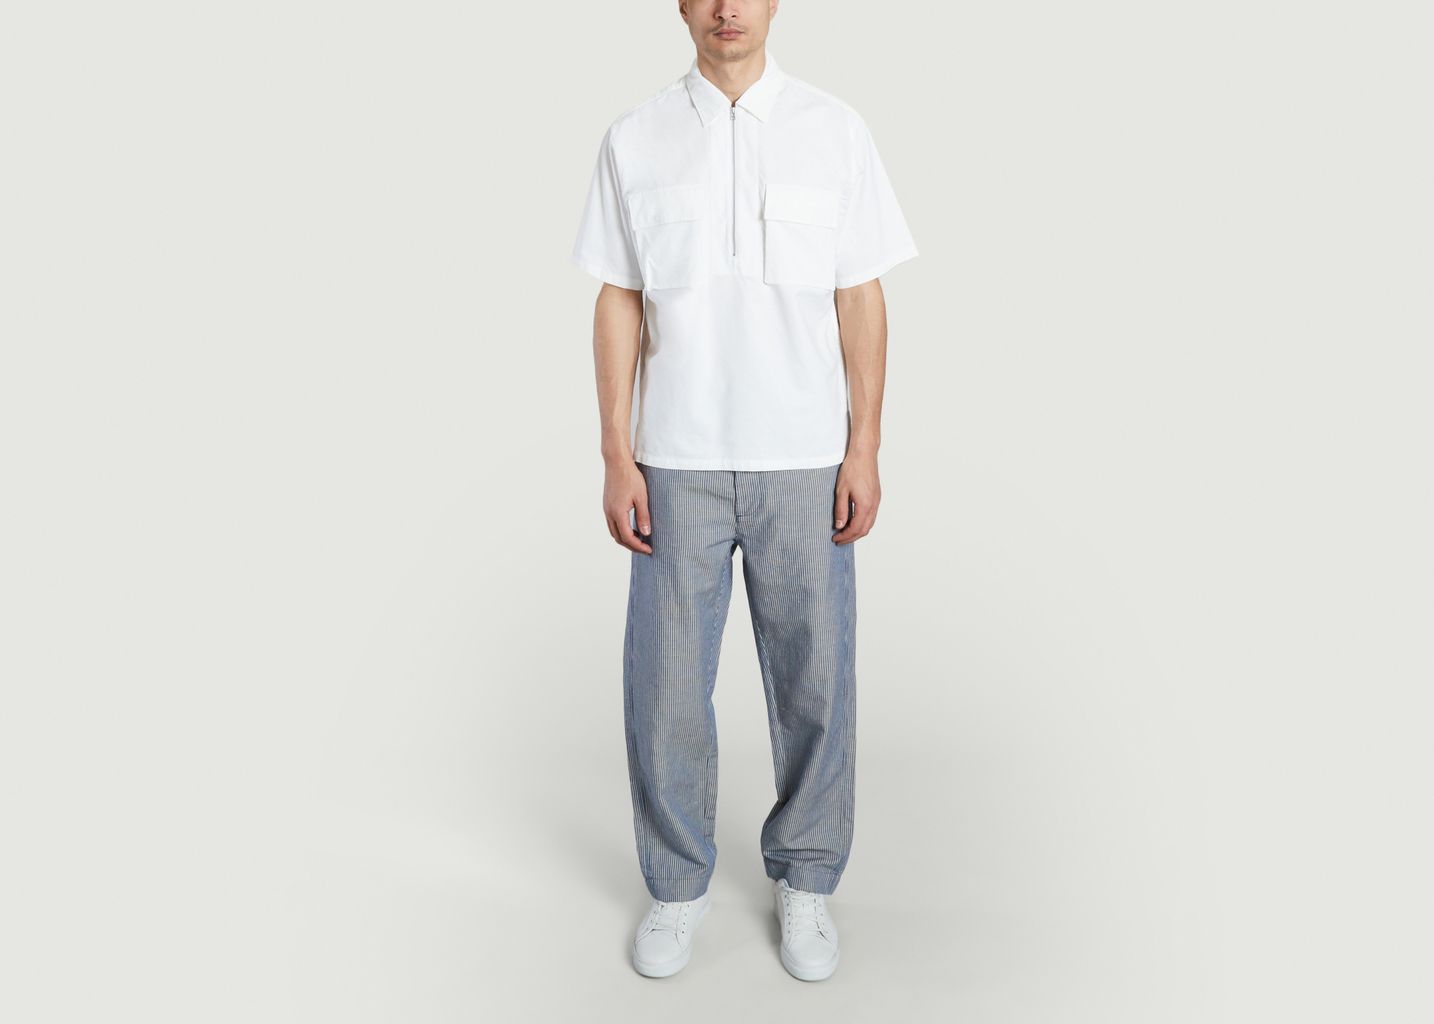 Ivan shirt - Norse Projects